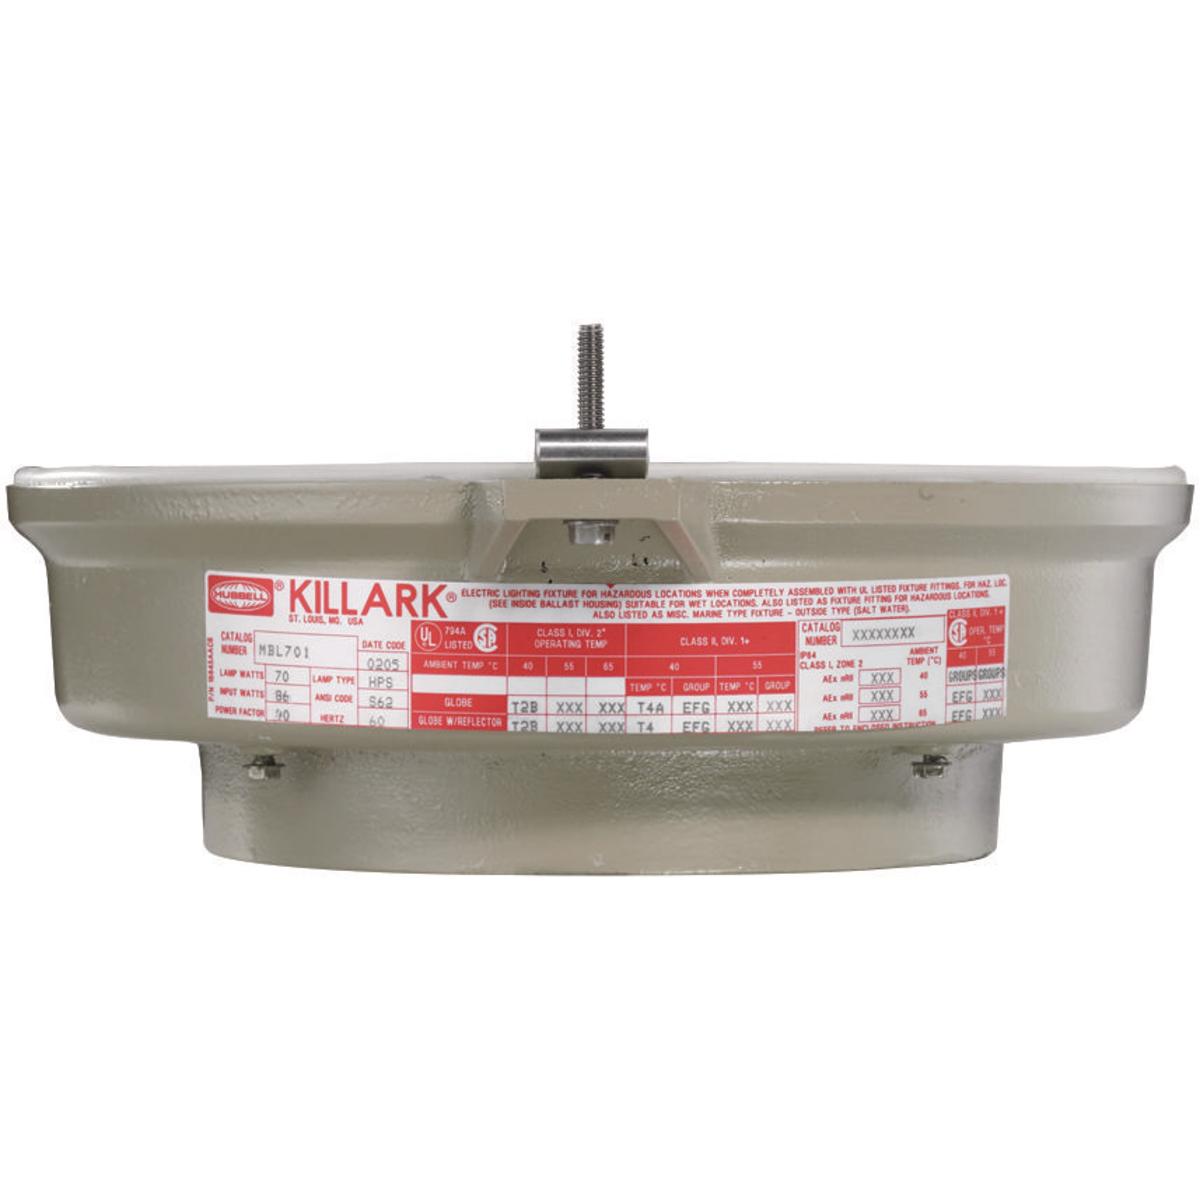 Hubbell VM2H100 VM2 Series - 100W Metal Halide Quadri-Volt - Housing  ; The VM2 Series is a low profile, low bay HID luminaire. The design of the VM2 makes it suitable for harsh and hazardous environments using a cast copper-free aluminum housing and mount. Its low profi